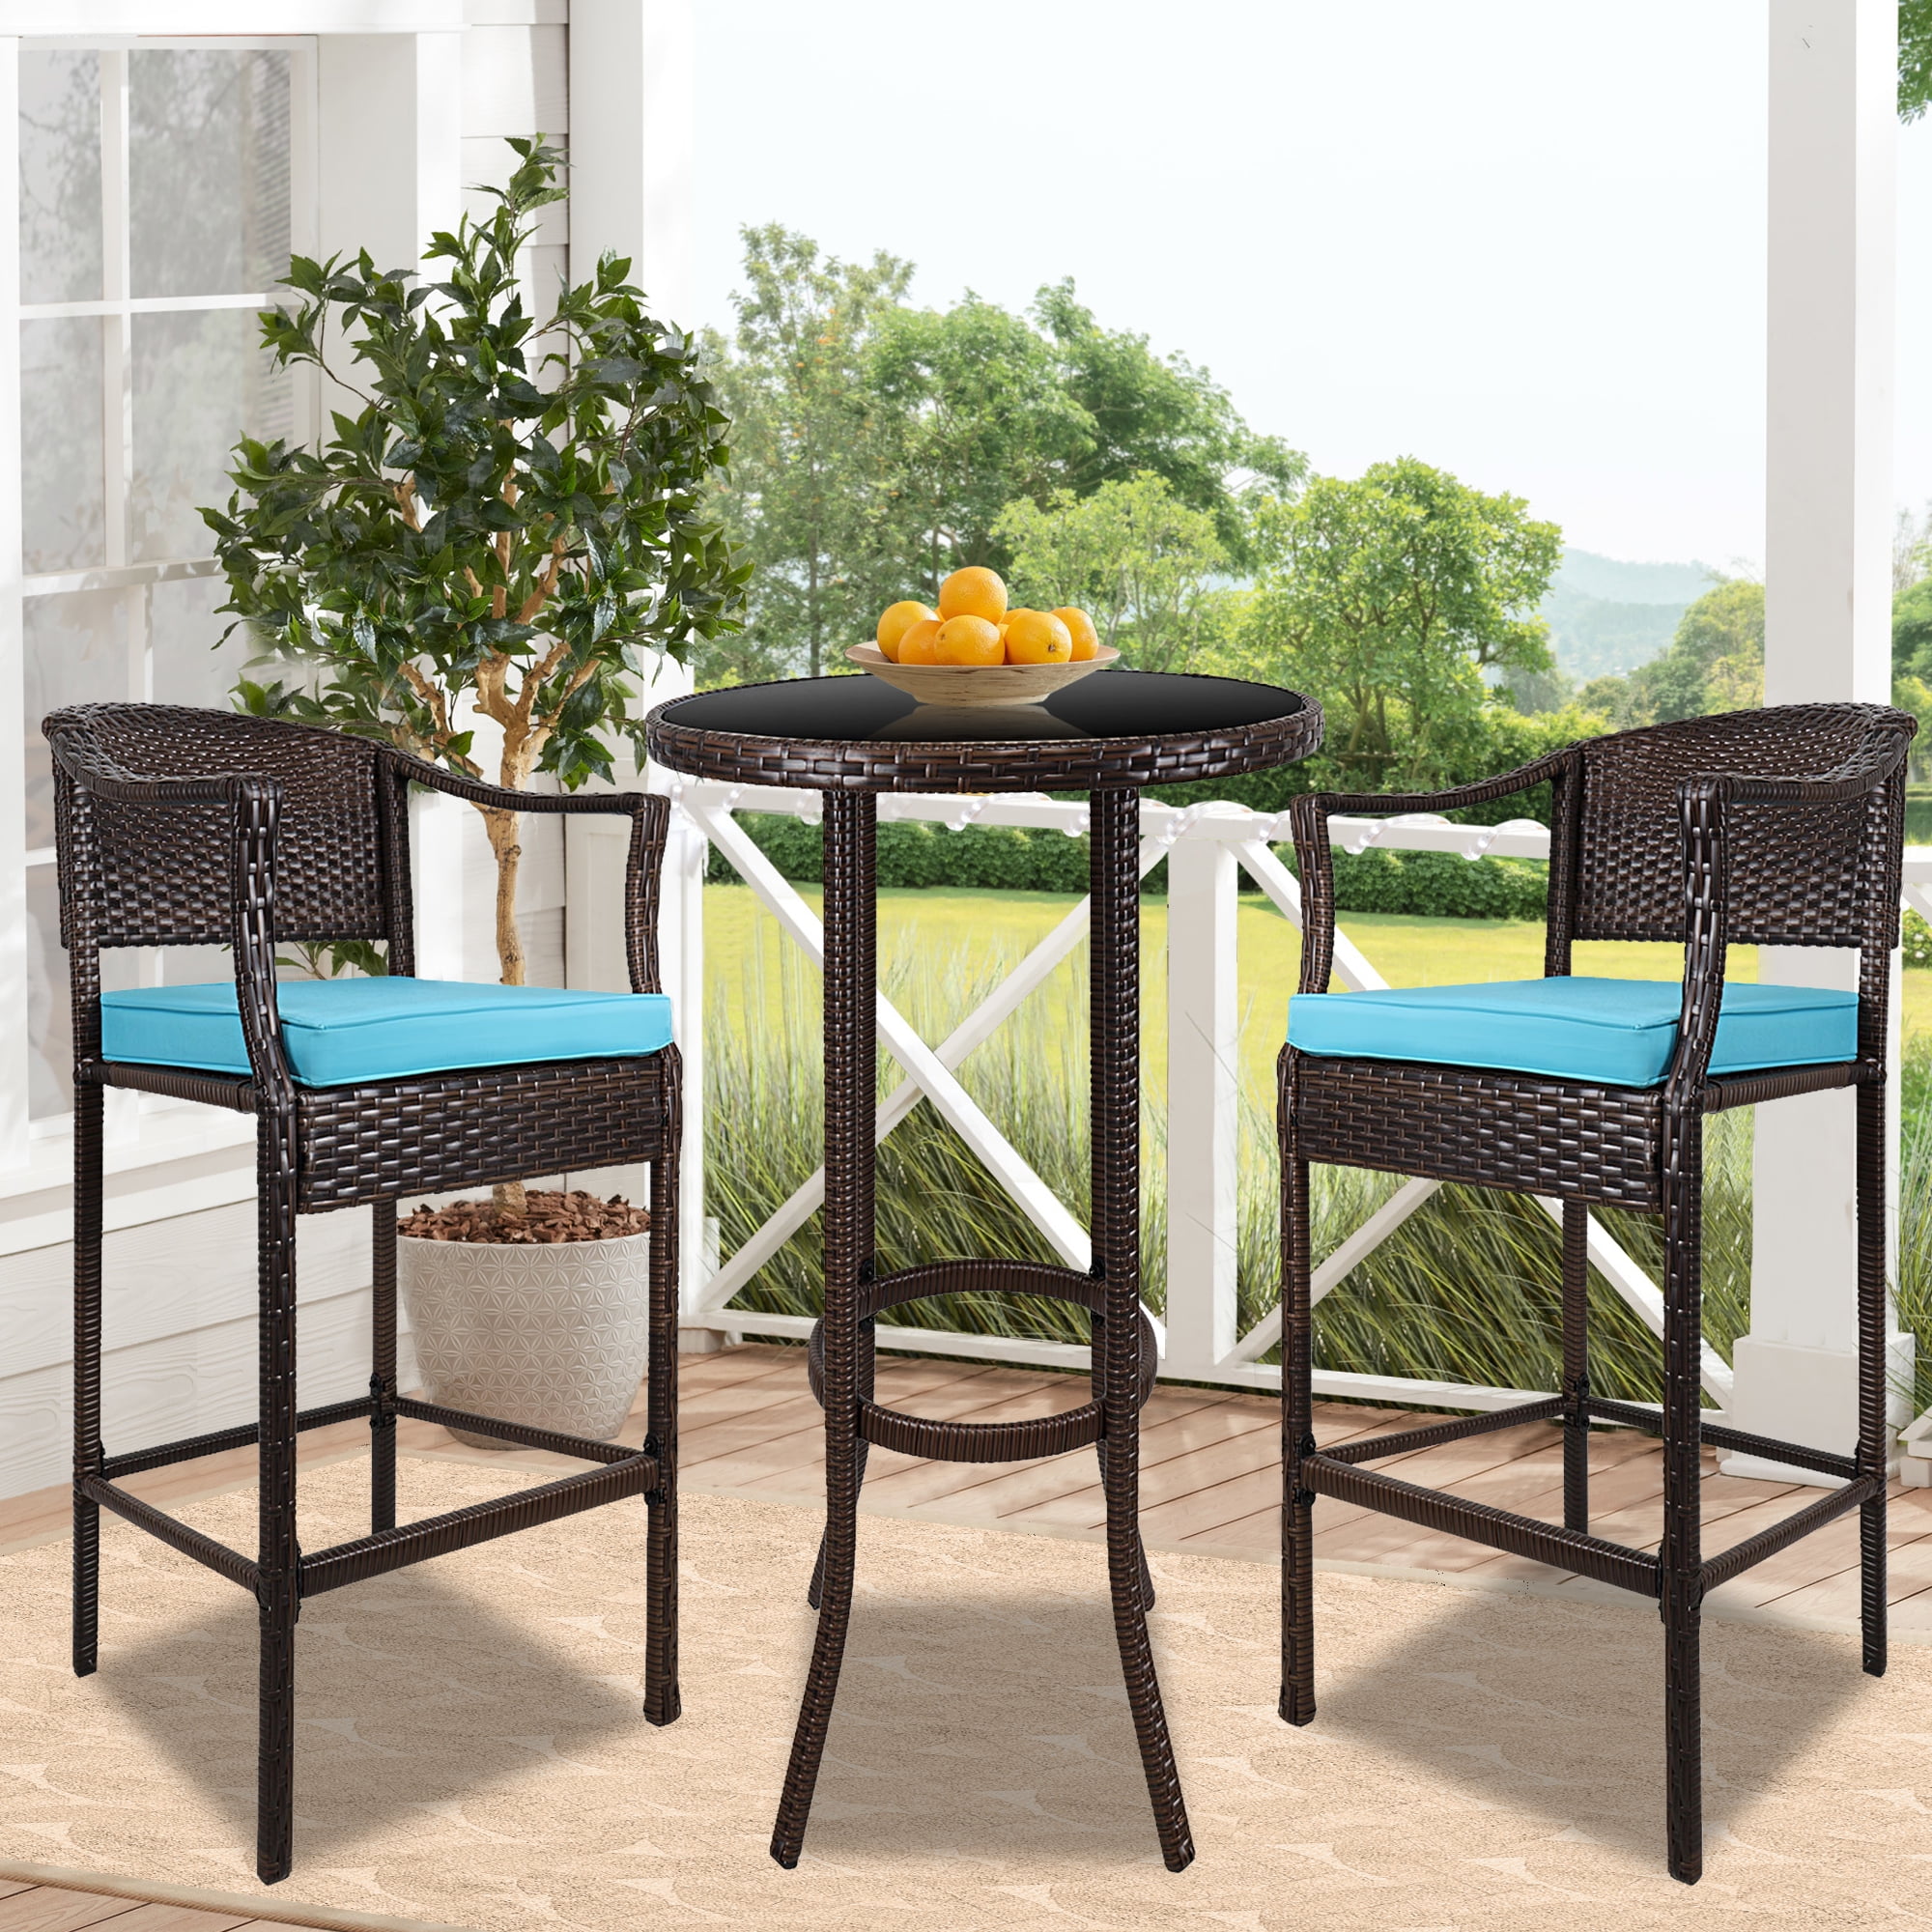 Patio Bistro Set 3 Piece Outdoor High, Outdoor Wicker Bar Height Table And Chairs